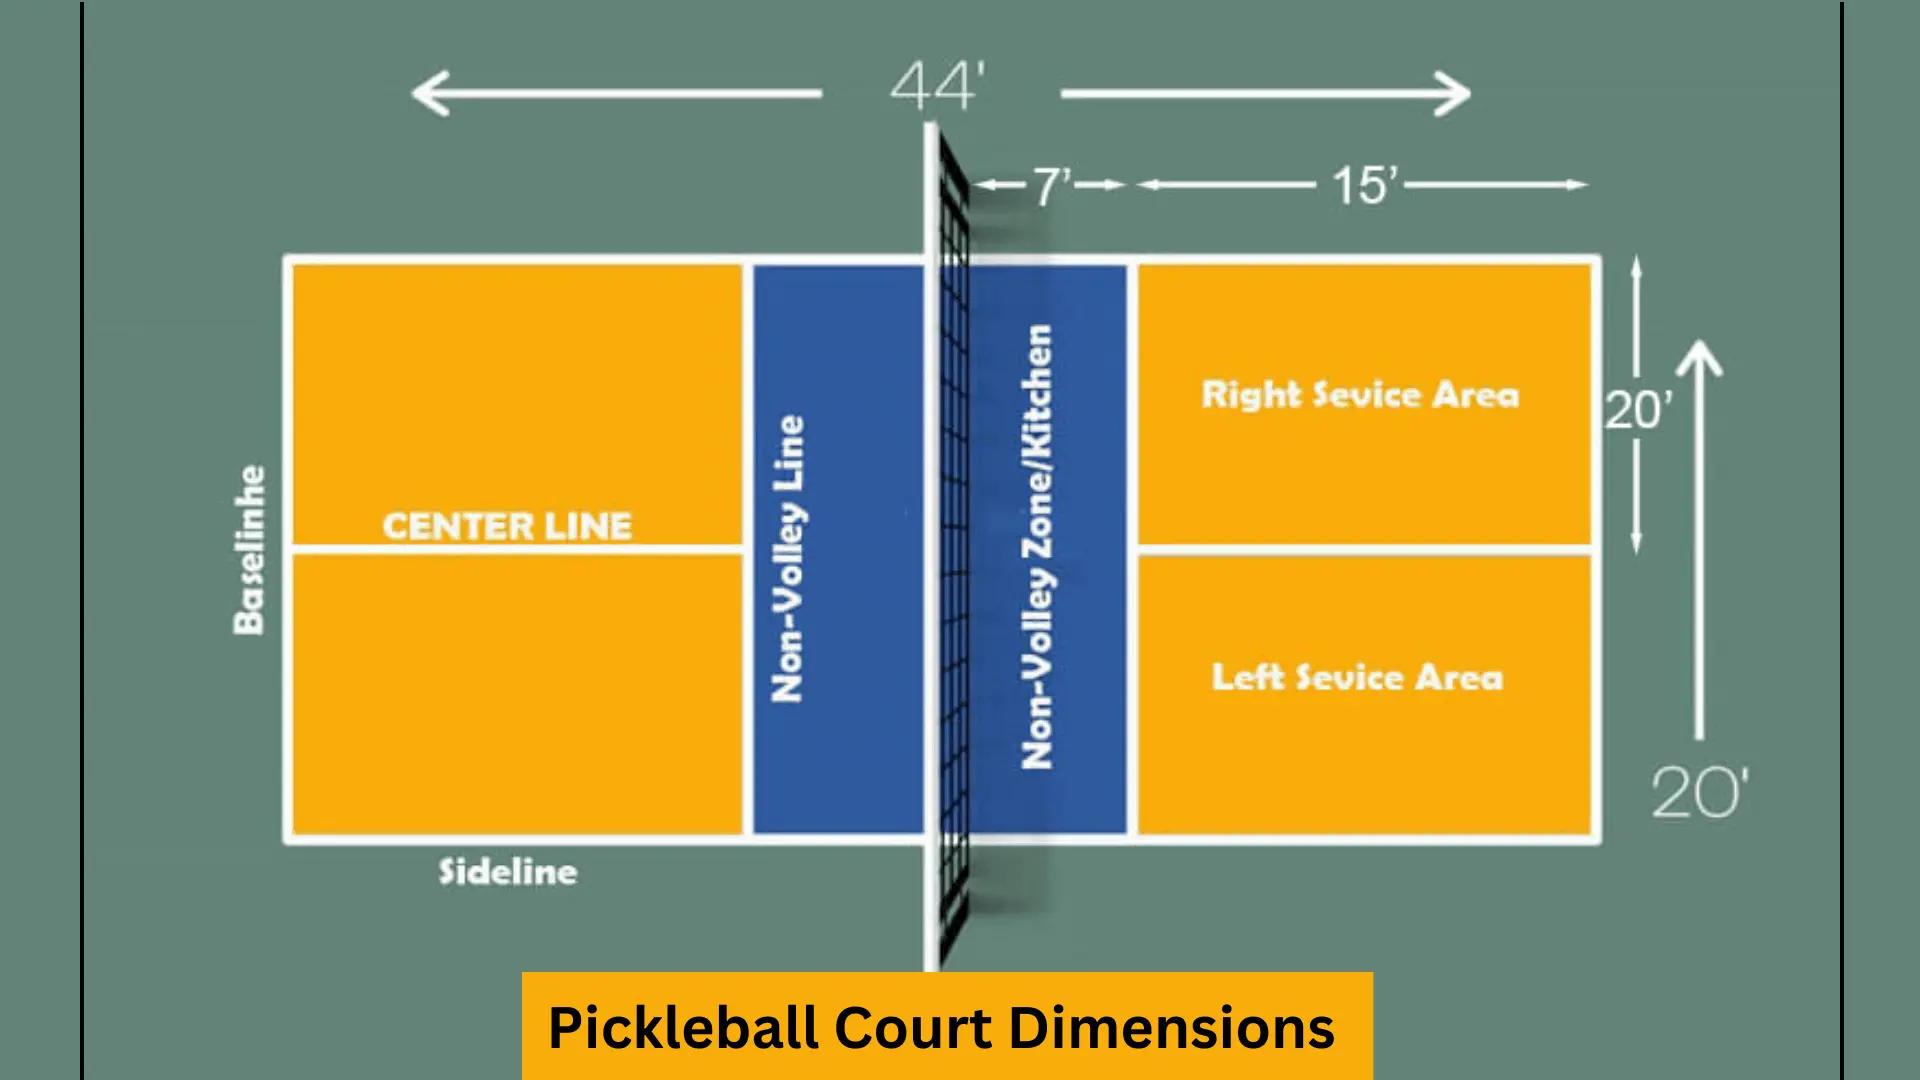 Pickleball Court Dimensions 丨What are the dimensions of a pickleball court?